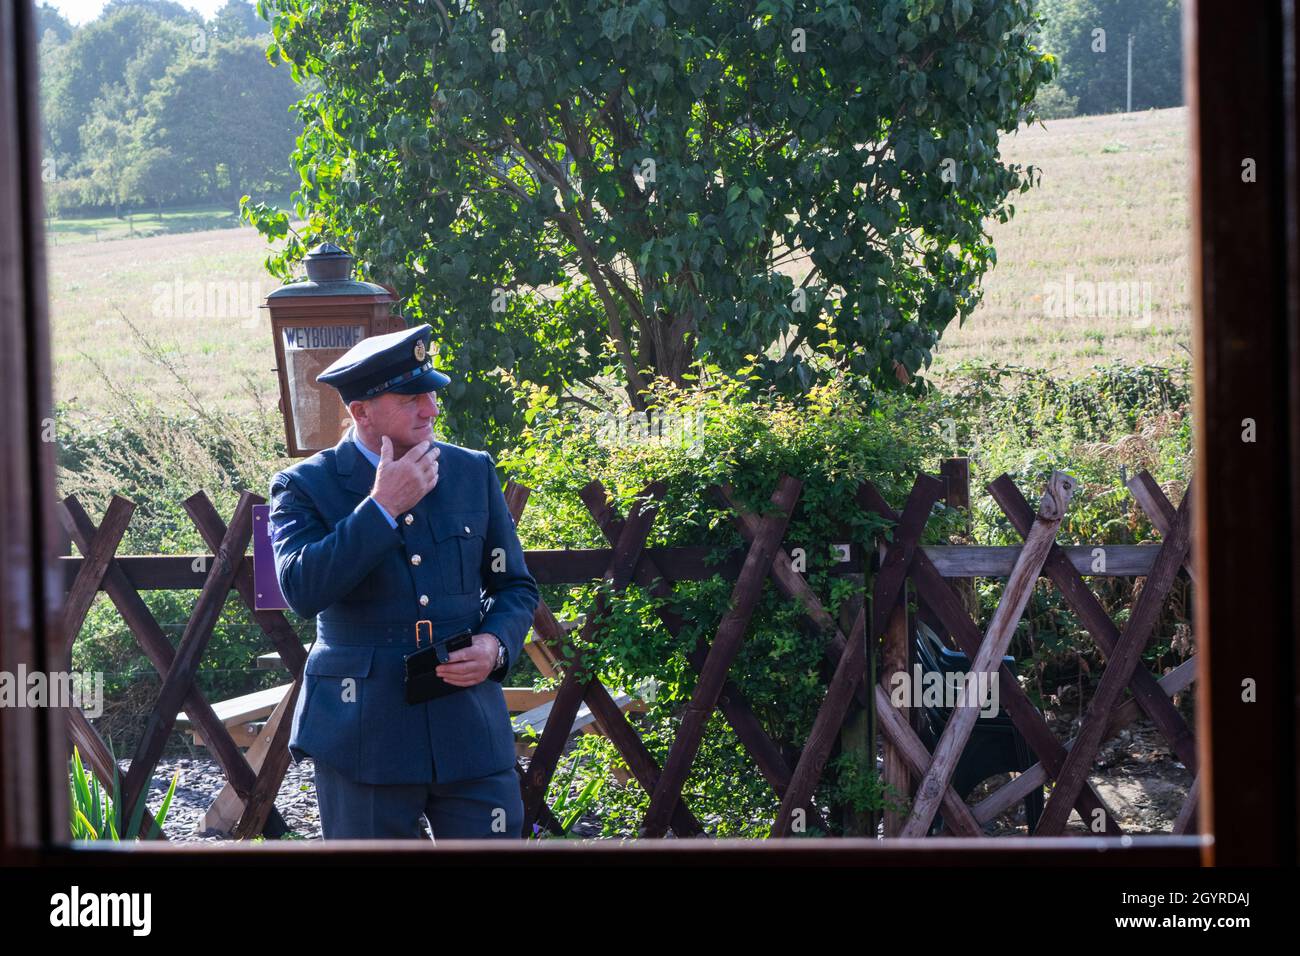 Sheringham, Norfolk, UK - SEPTEMBER 14 2019: Man in 1940s RAF officer uniform holds his chin viewed from inside steam train carriage at Weybourne Stock Photo